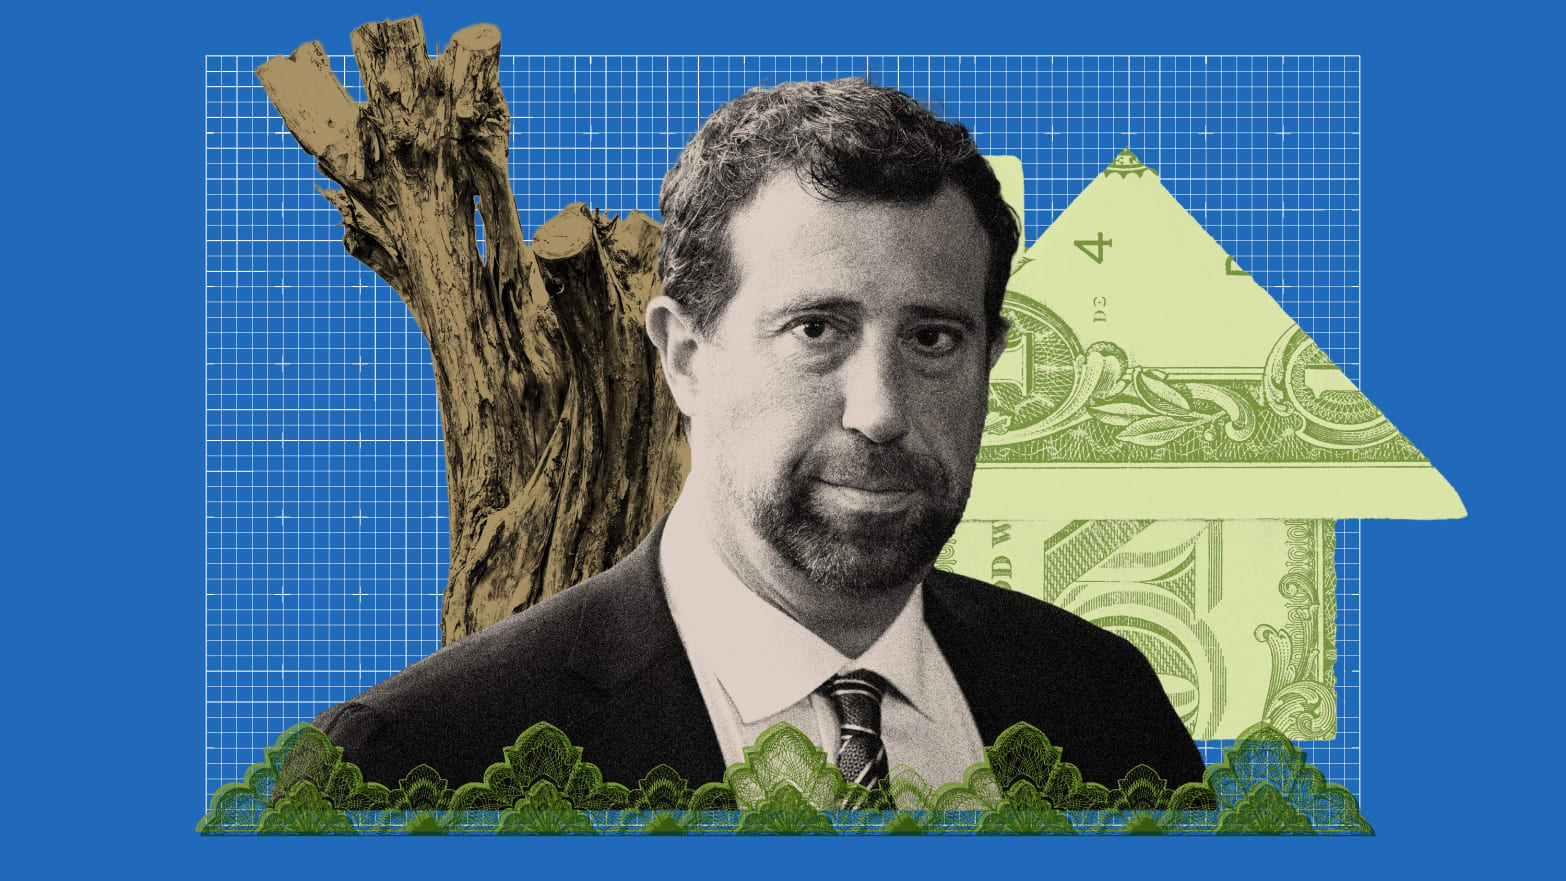 Photo illustration of Justin Ishbia collaged on top of a blueprint background, a tree stump, and an origami house made of money.